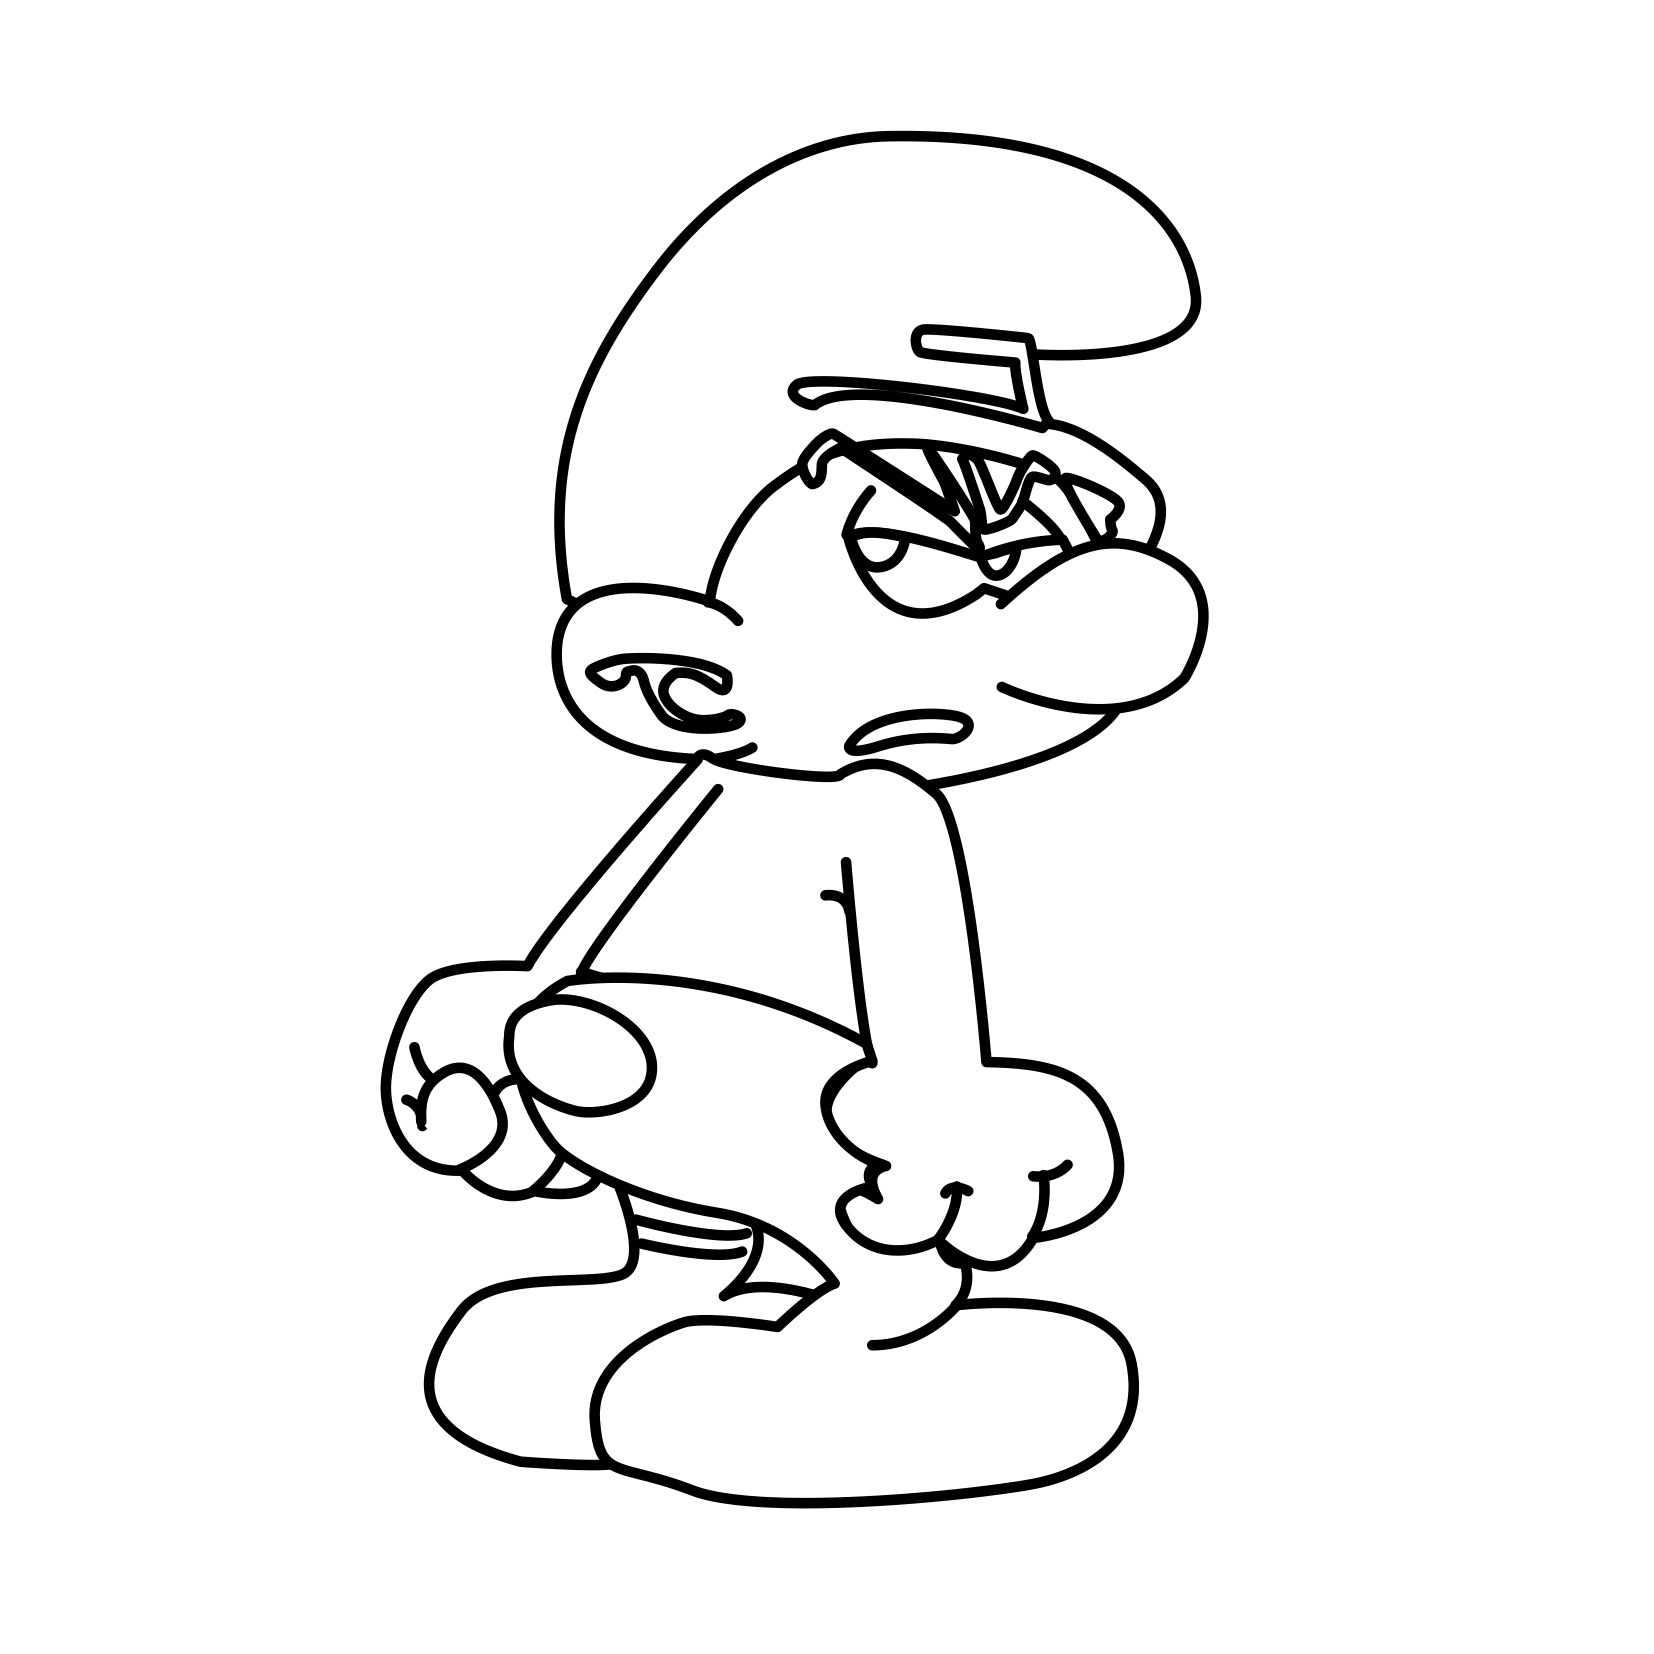 Download Free Printable Smurf Coloring Pages For Kids